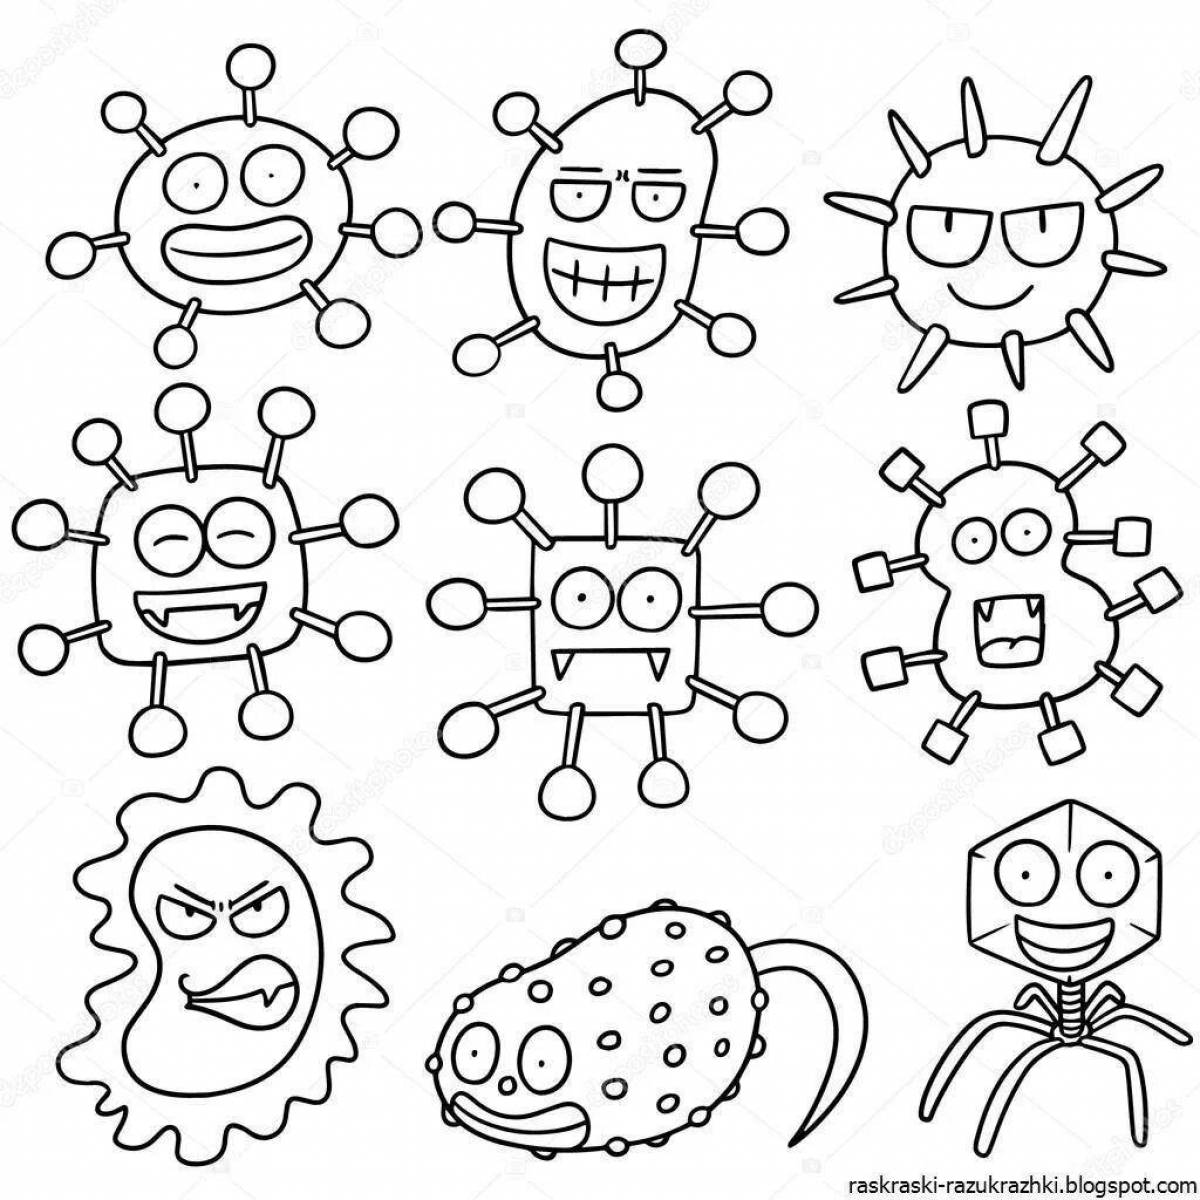 Friendly bacteria coloring page